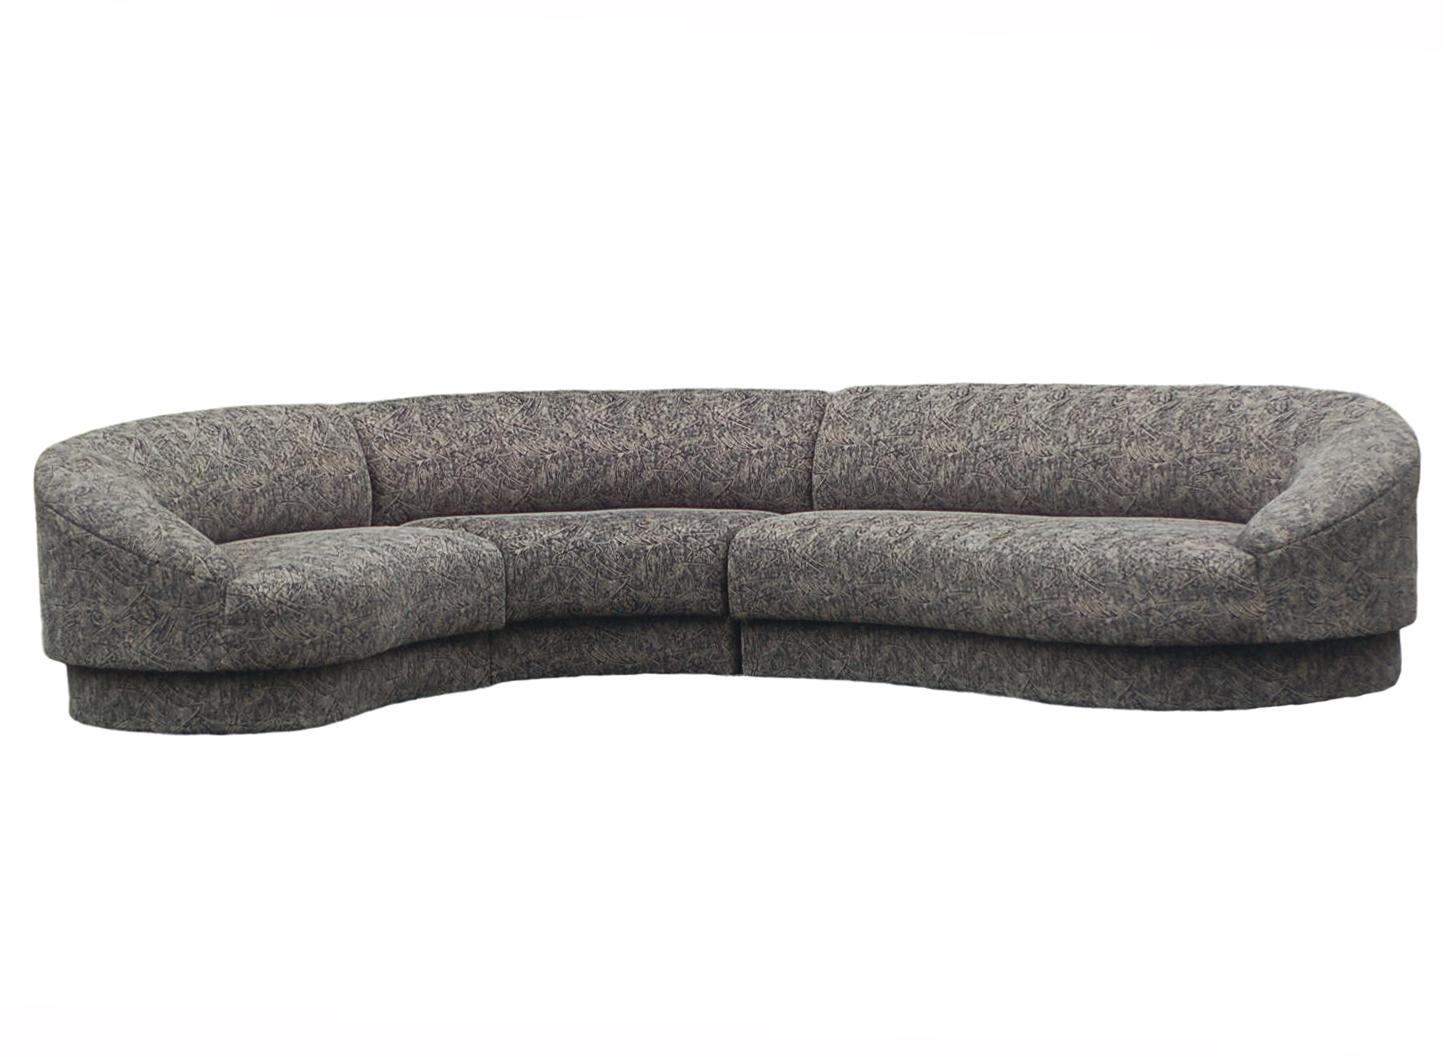 American Mid-Century Modern Curved Serpentine Sectional Sofa by Vladimir Kagan for Weiman